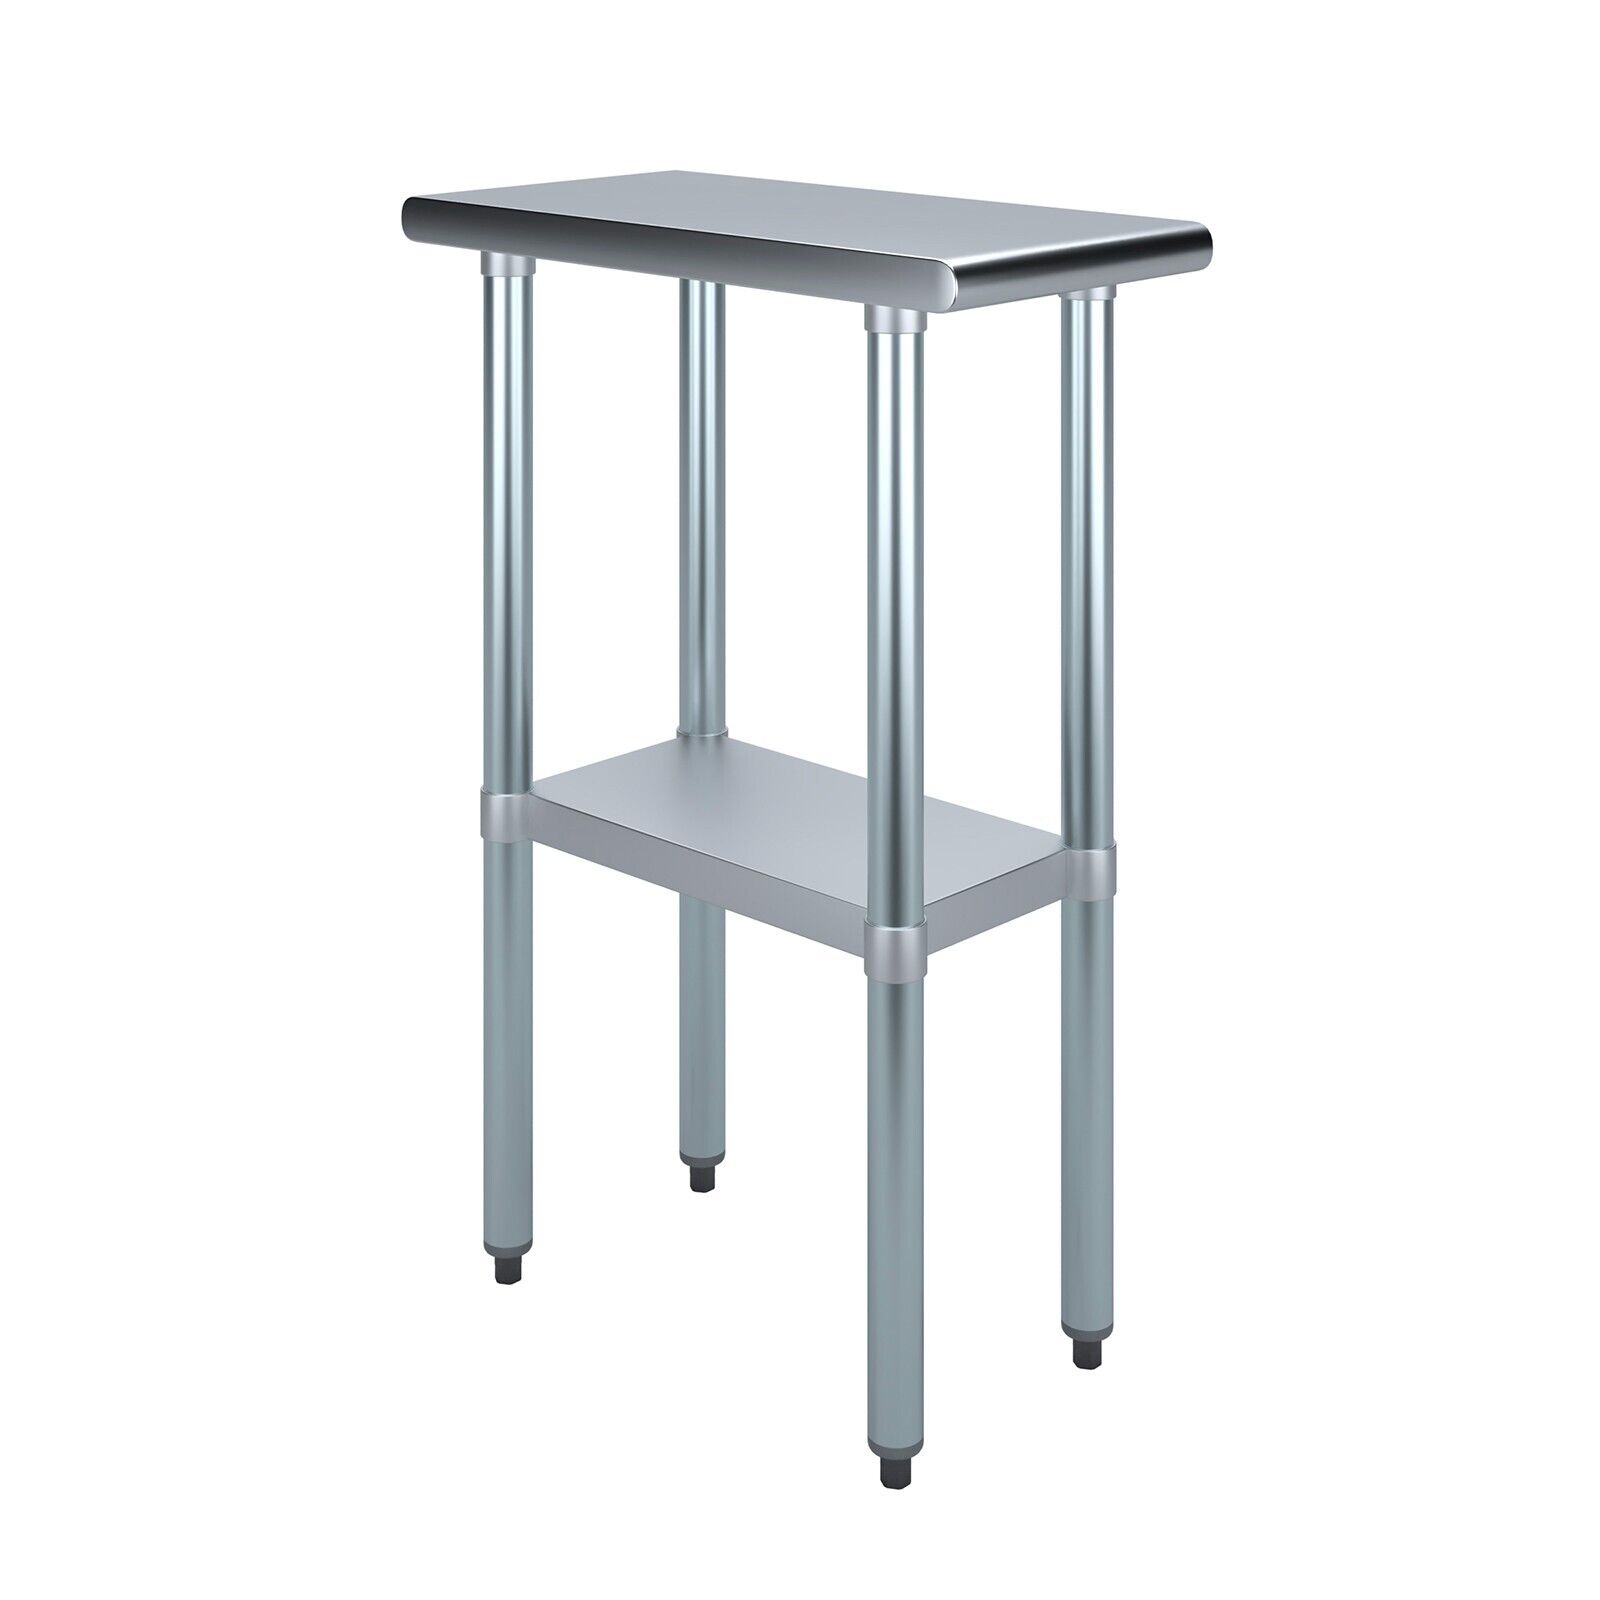 24 in. x 12 in. Stainless Steel Work Table | Metal Utility Table